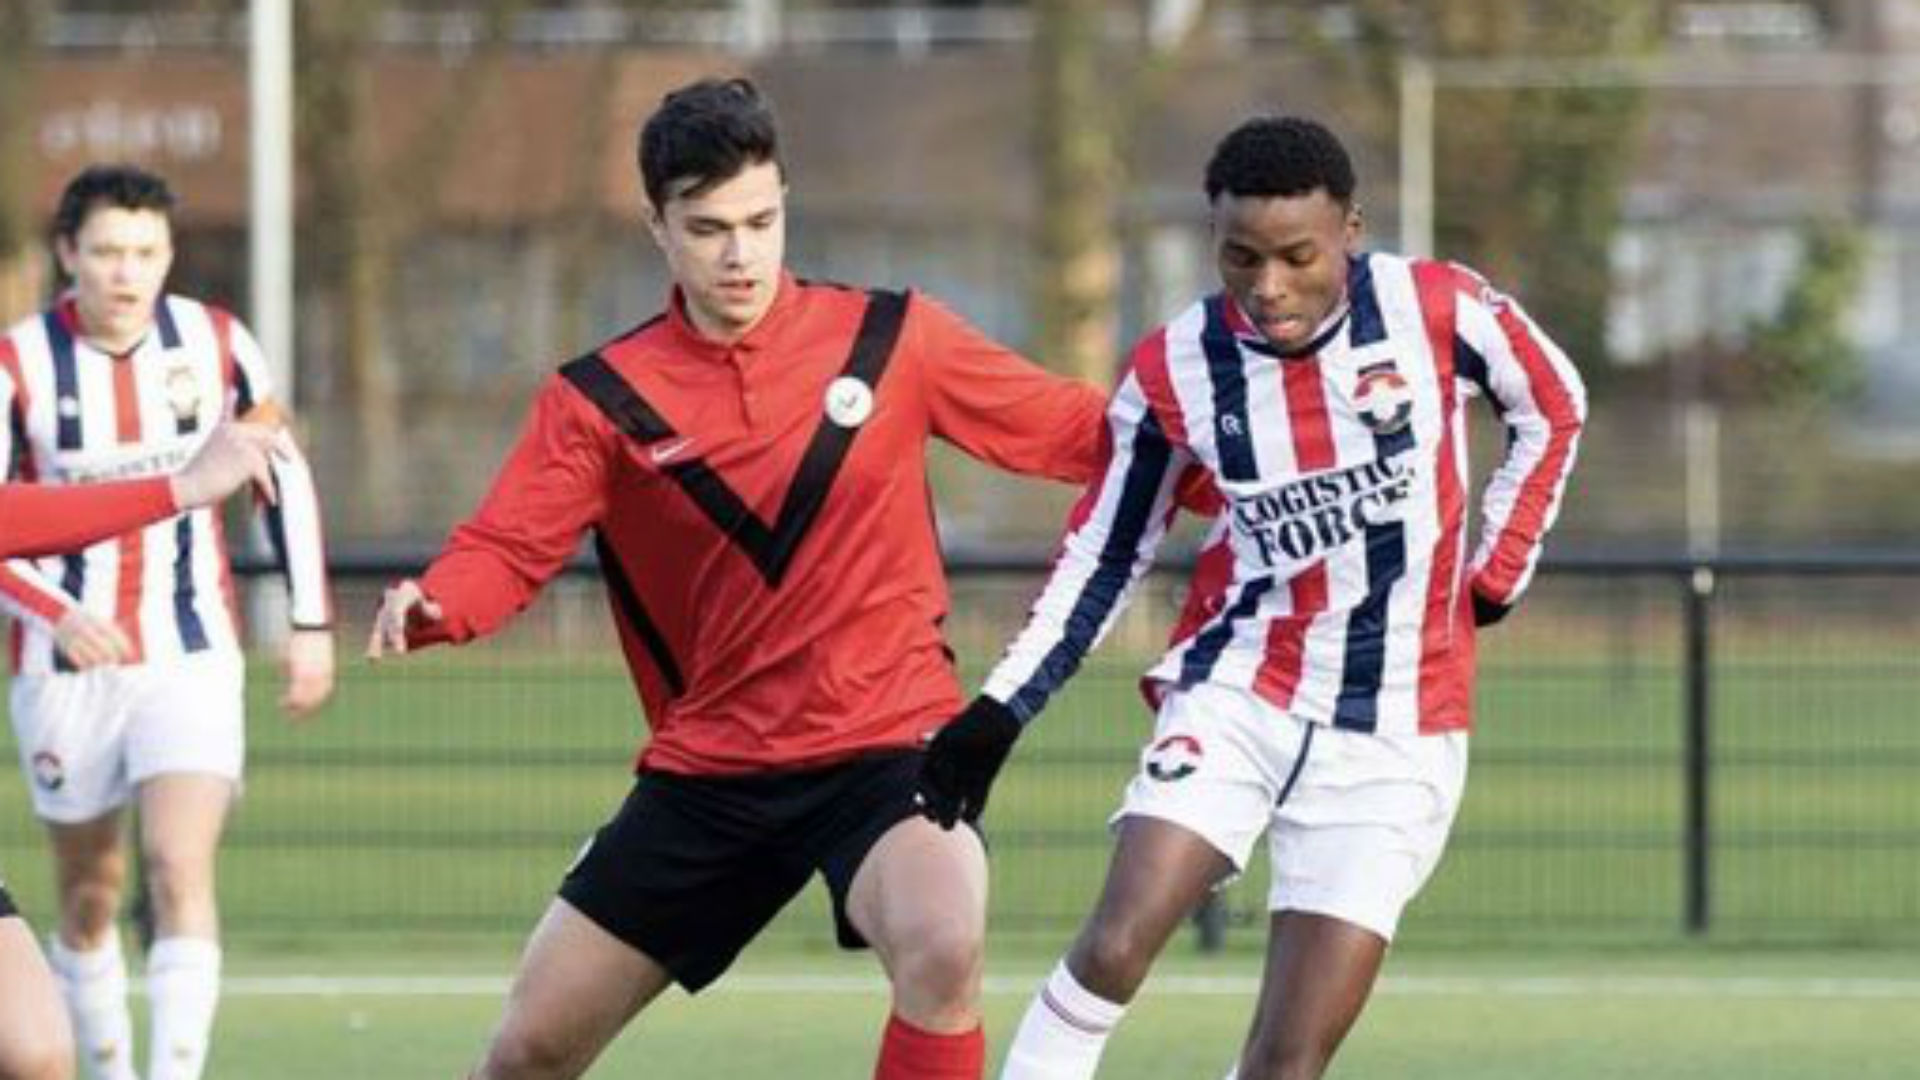 Willem II's Gachangi reveals Manchester United ambition, desire for Champions League success